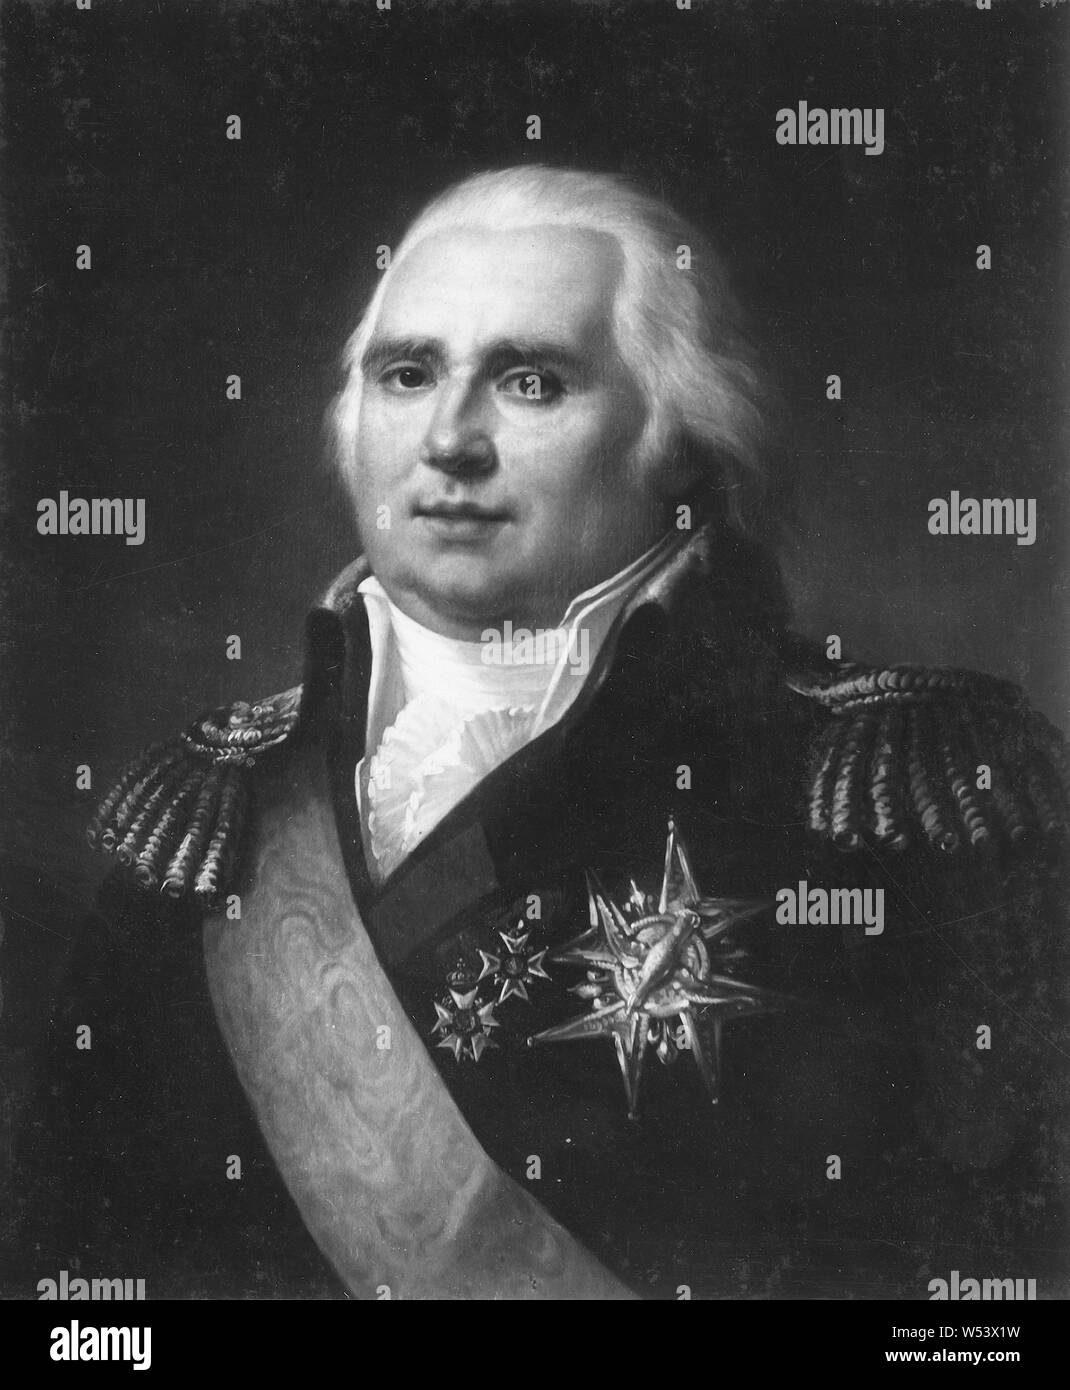 King Louis XVIII, Louis XVIII, 1755-1824, King of France, painting, Oil, Height, 65 cm (25.5 inches), Width, 55 cm (21.6 inches) Stock Photo